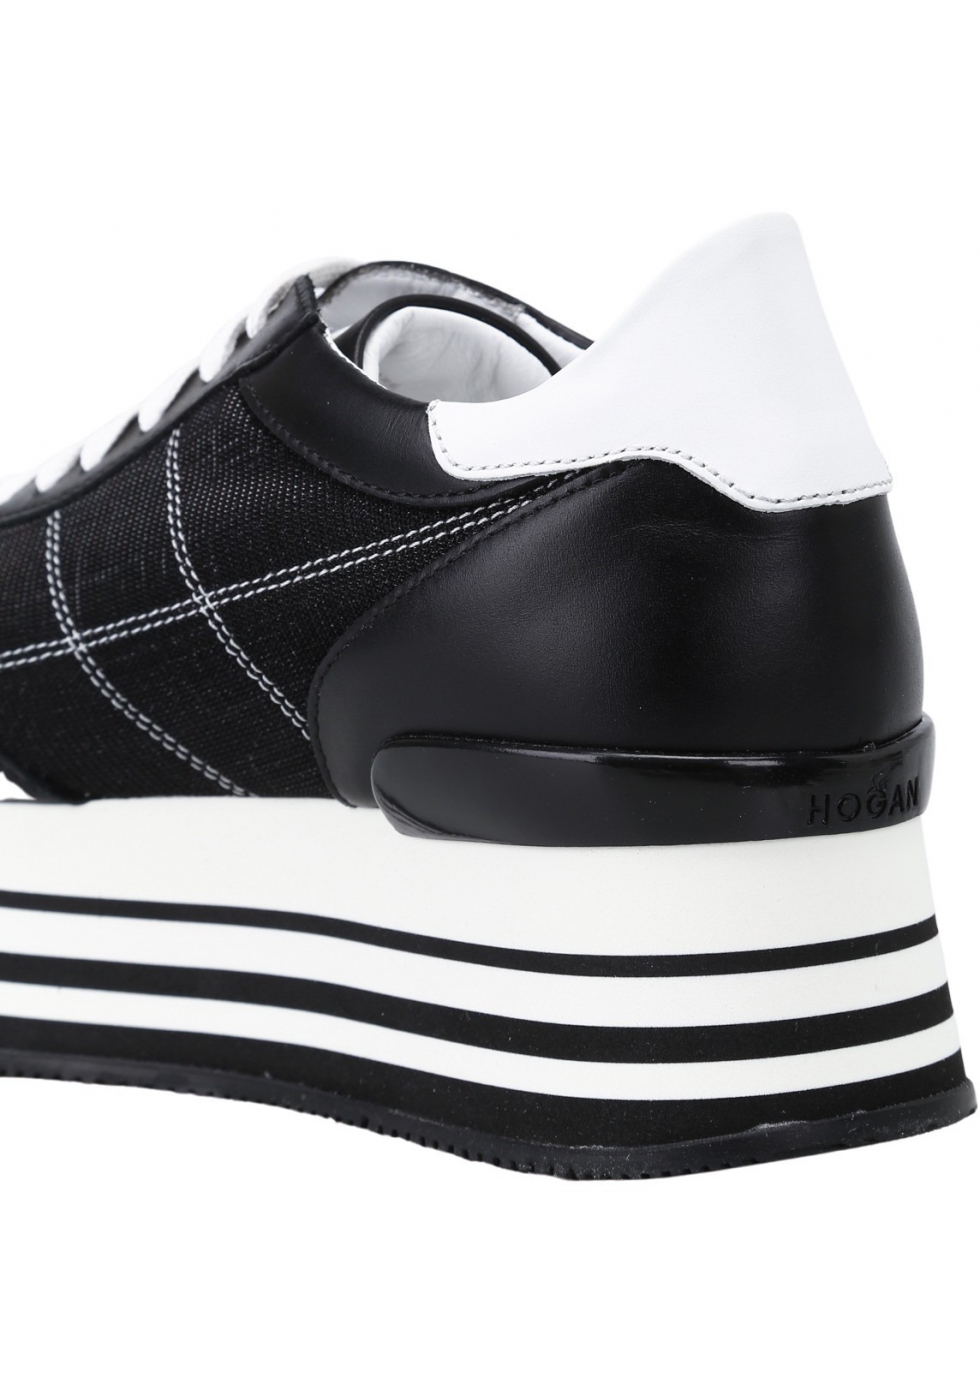 Hogan women's wedge sneakers in black leather and fabric - Italian Boutique